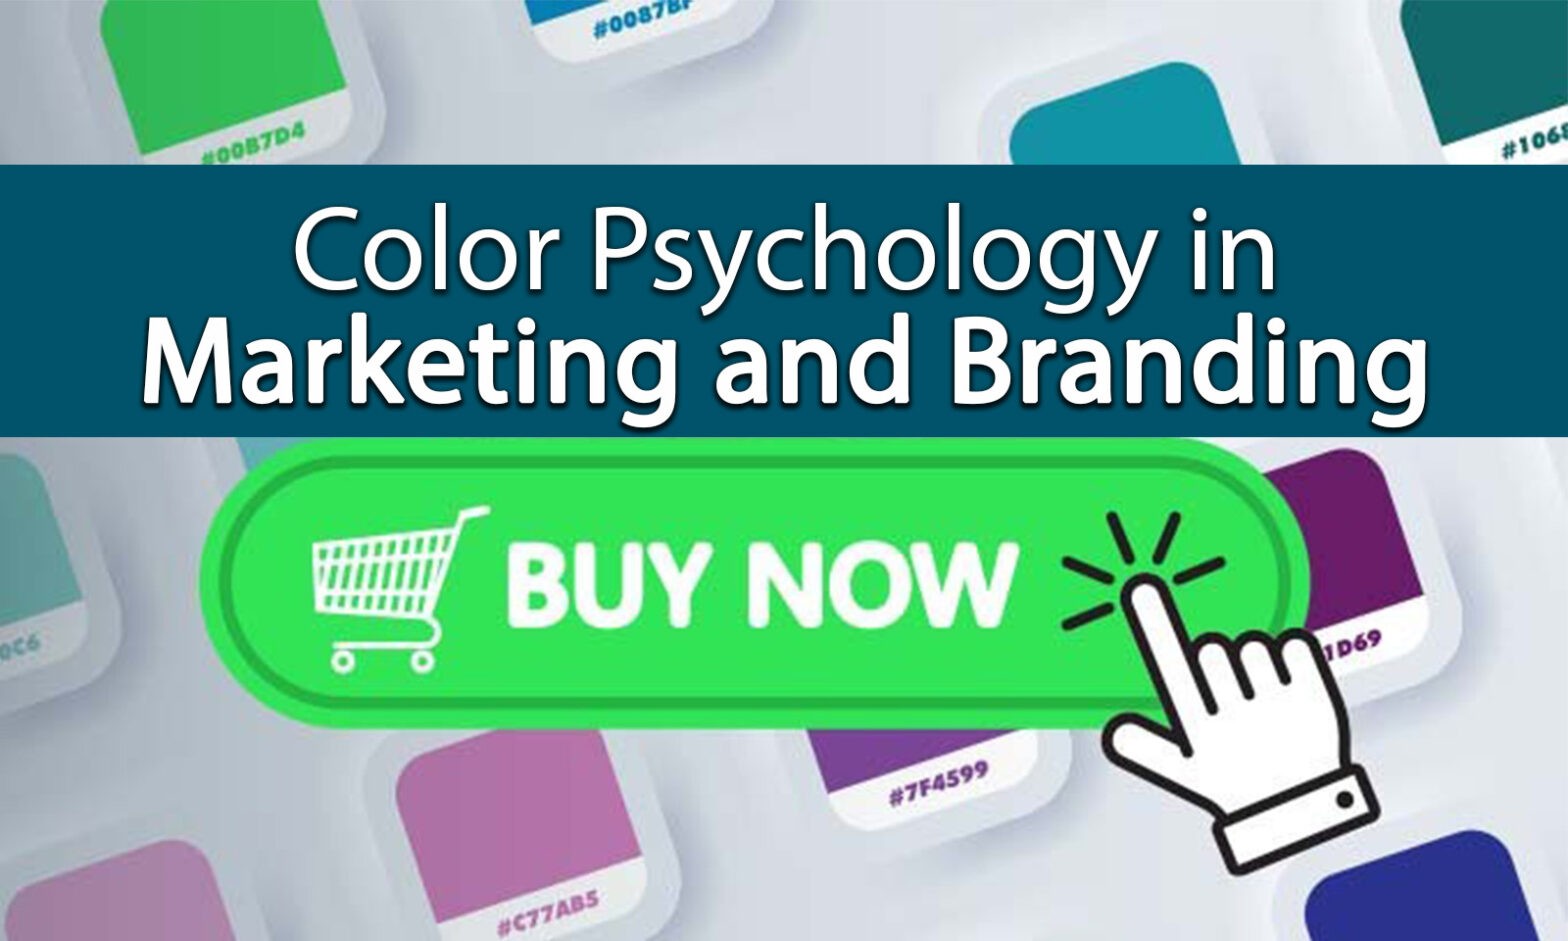 Color Psychology in Marketing: What Are Your Hues Doing For You?